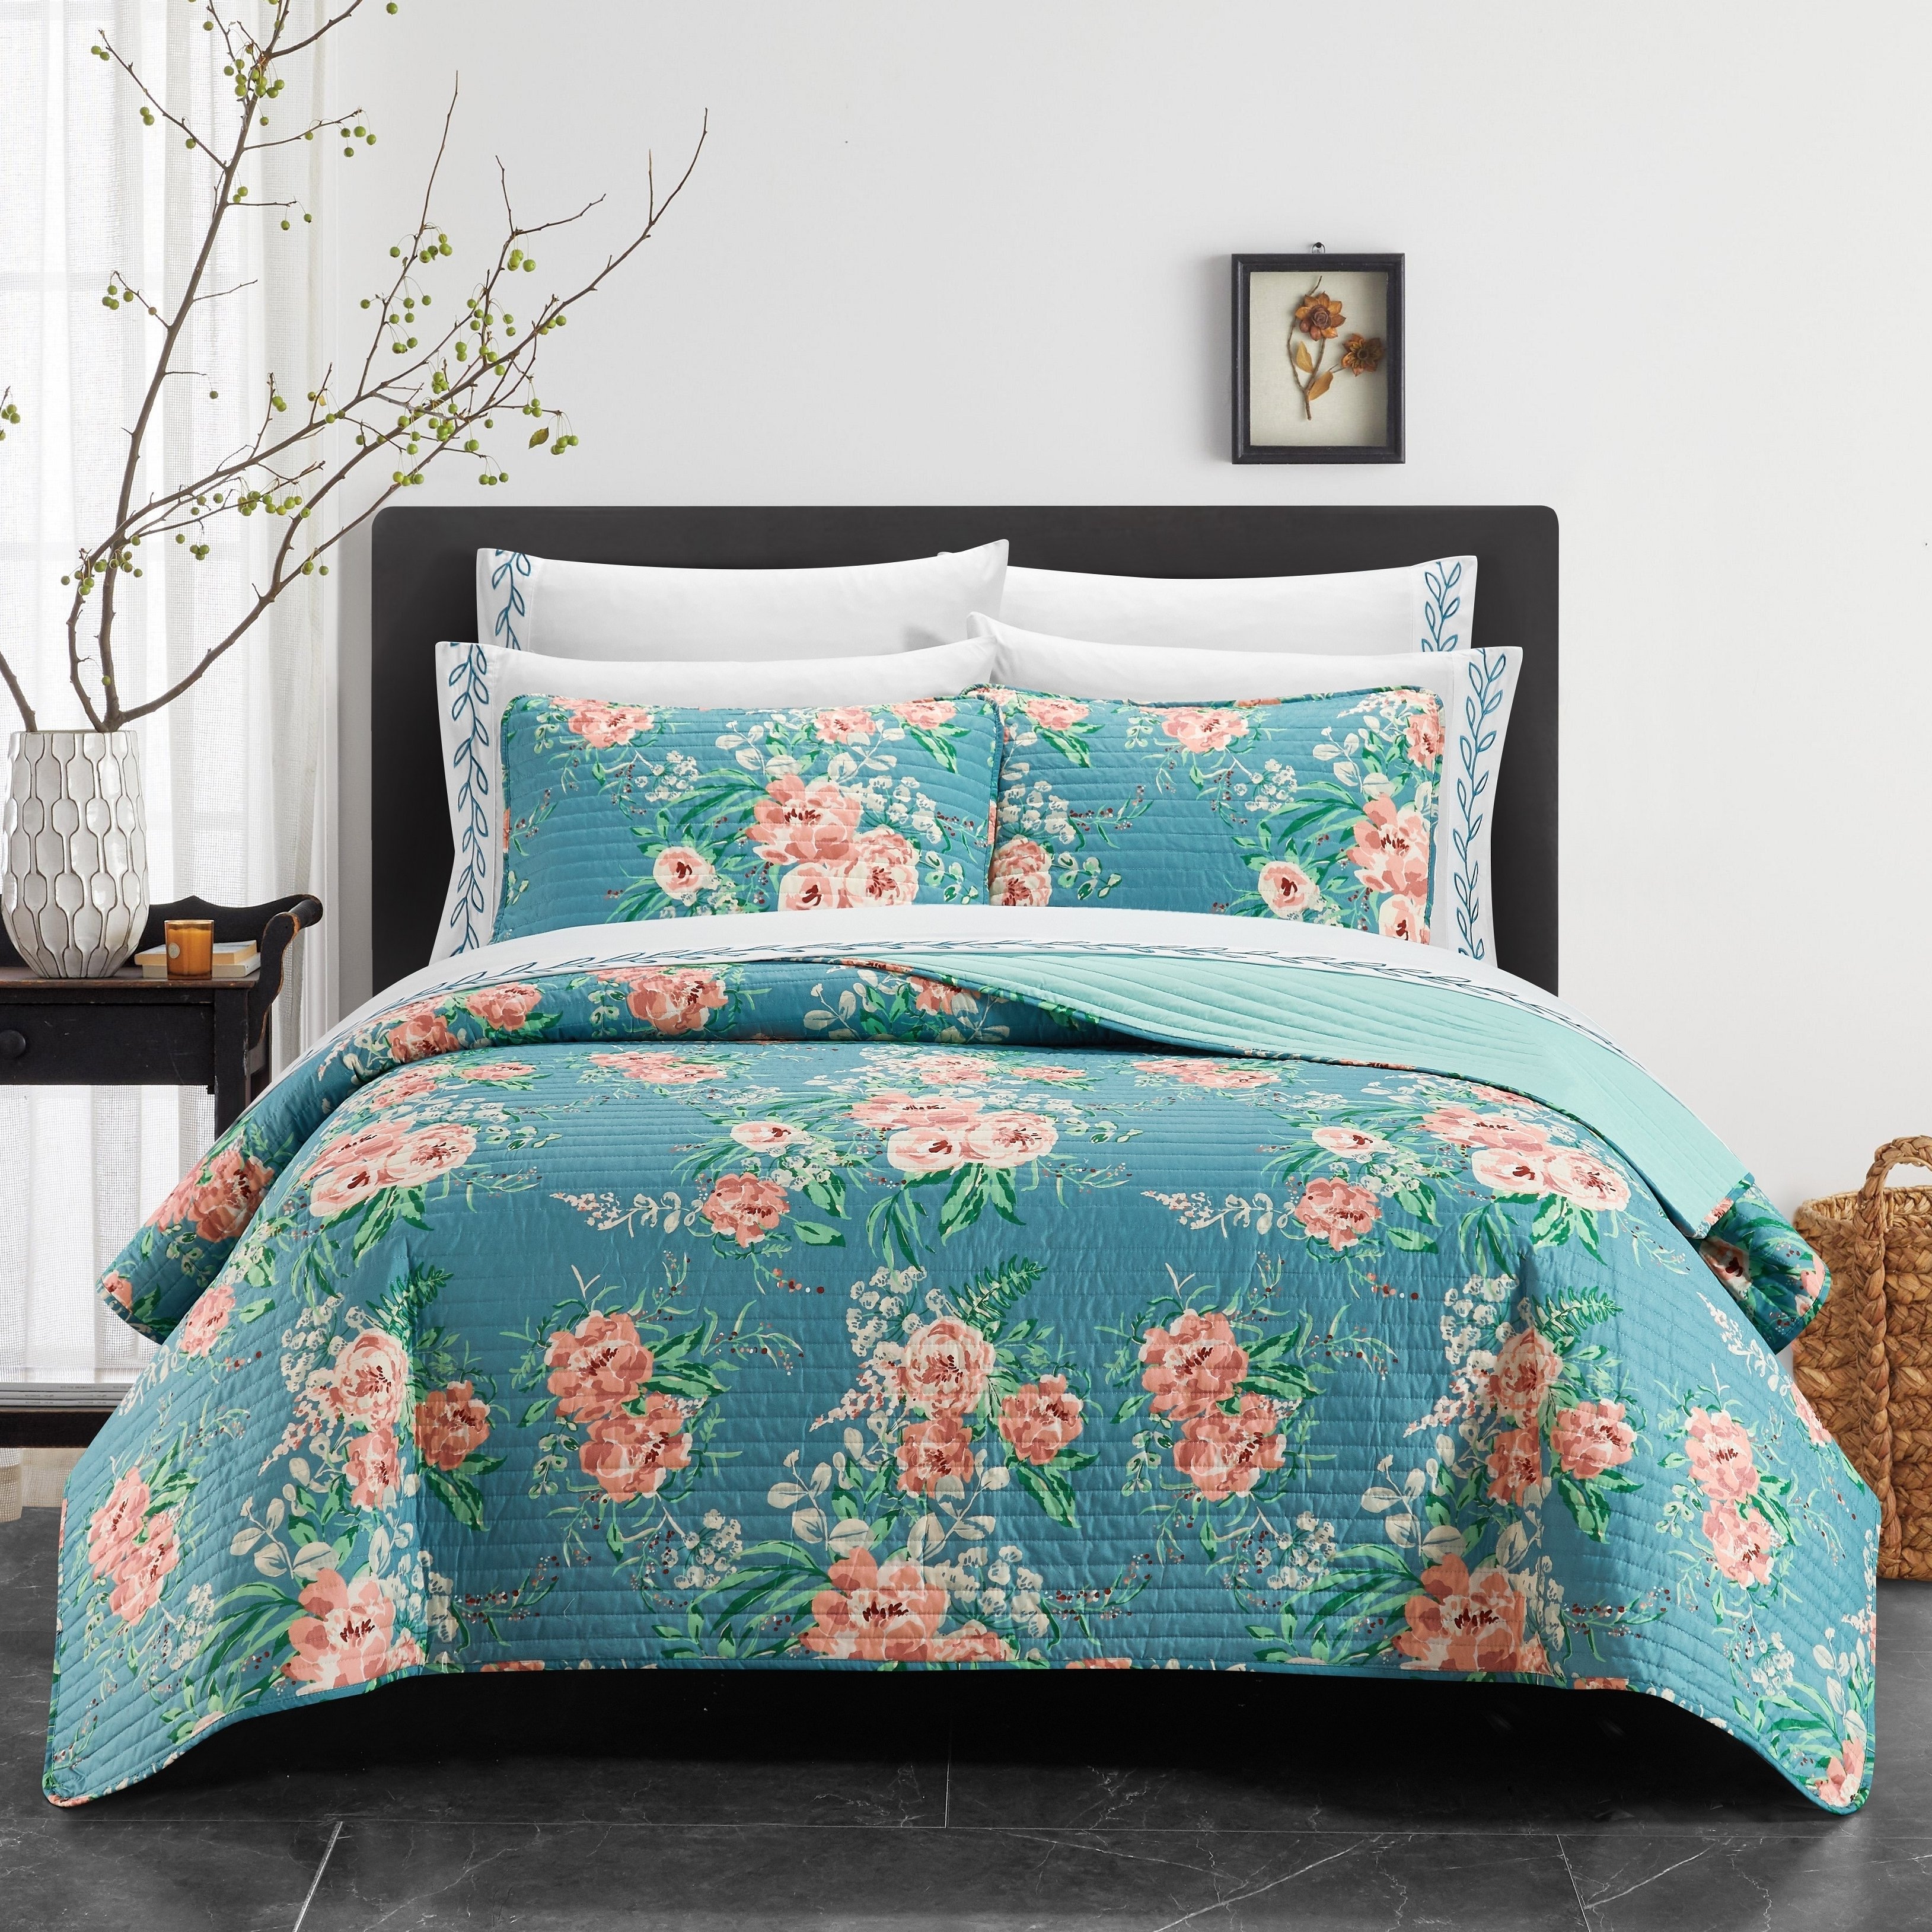 Palm Spring 9 Or 6 Piece Quilt Set Watercolor Floral Pattern Print Bed In A Bag - Aqua, Twin